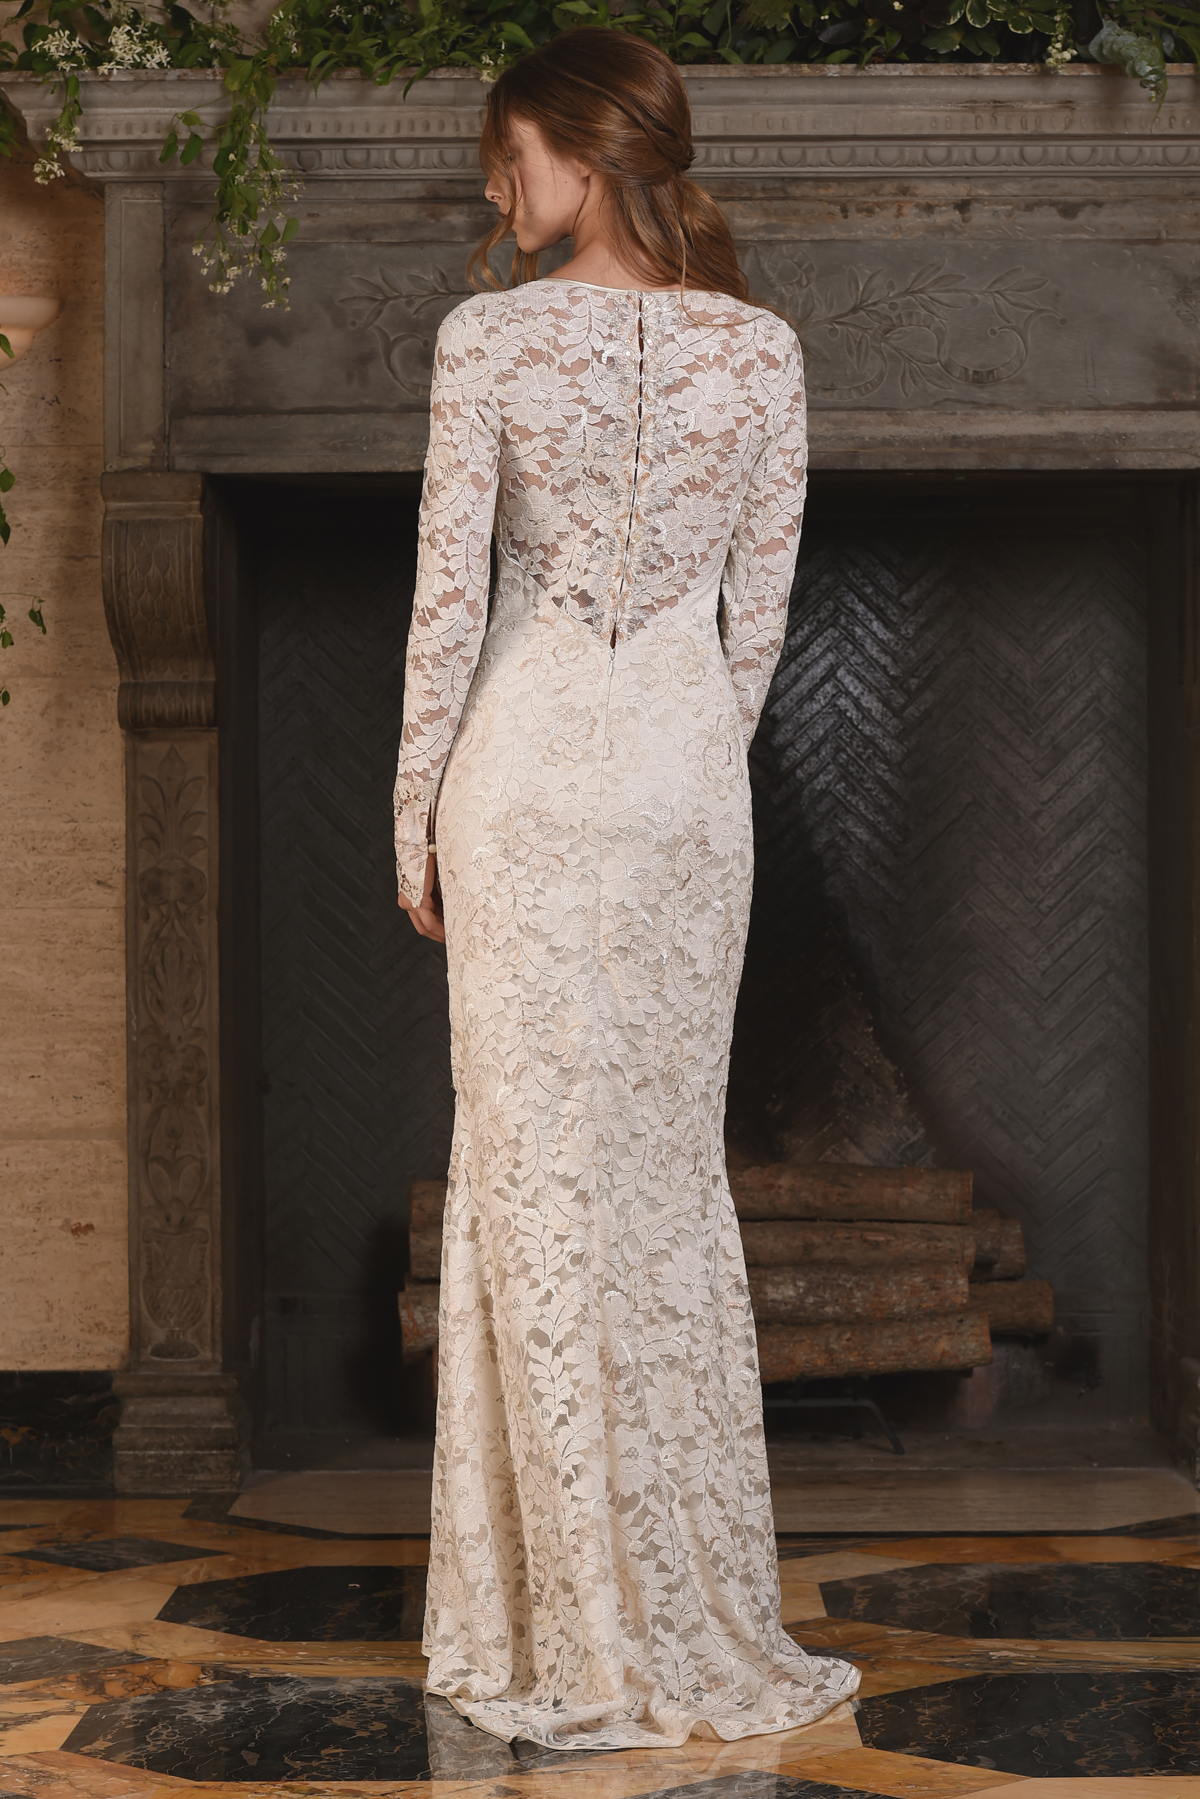 The Amber gown, from Claire Pettibone's 'The Four Seasons' bridal couture collection for 2017.